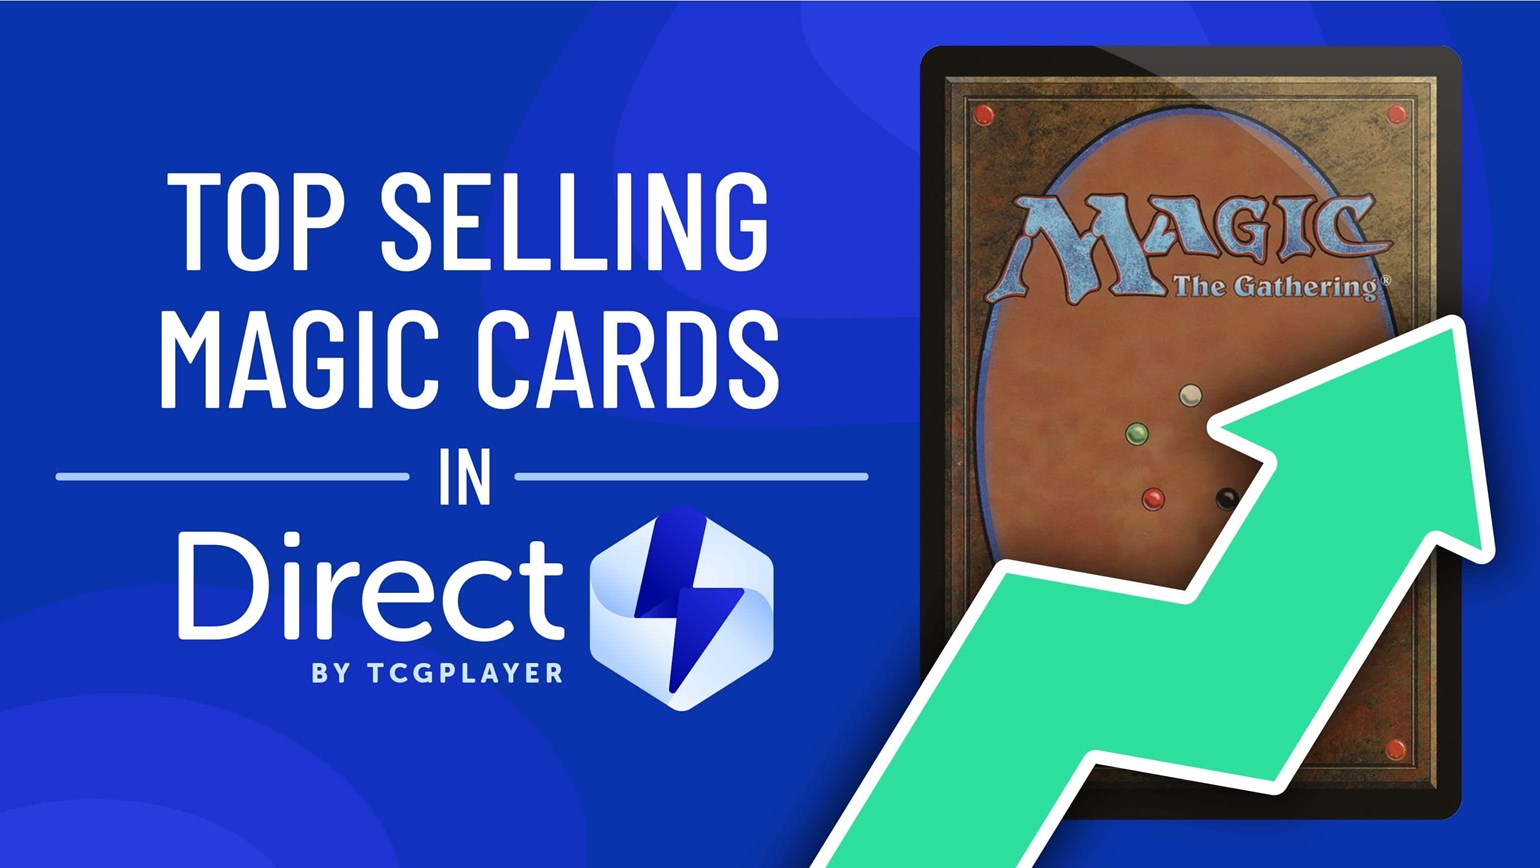 July Top Selling Magic: The Gathering Cards in Direct by TCGplayer